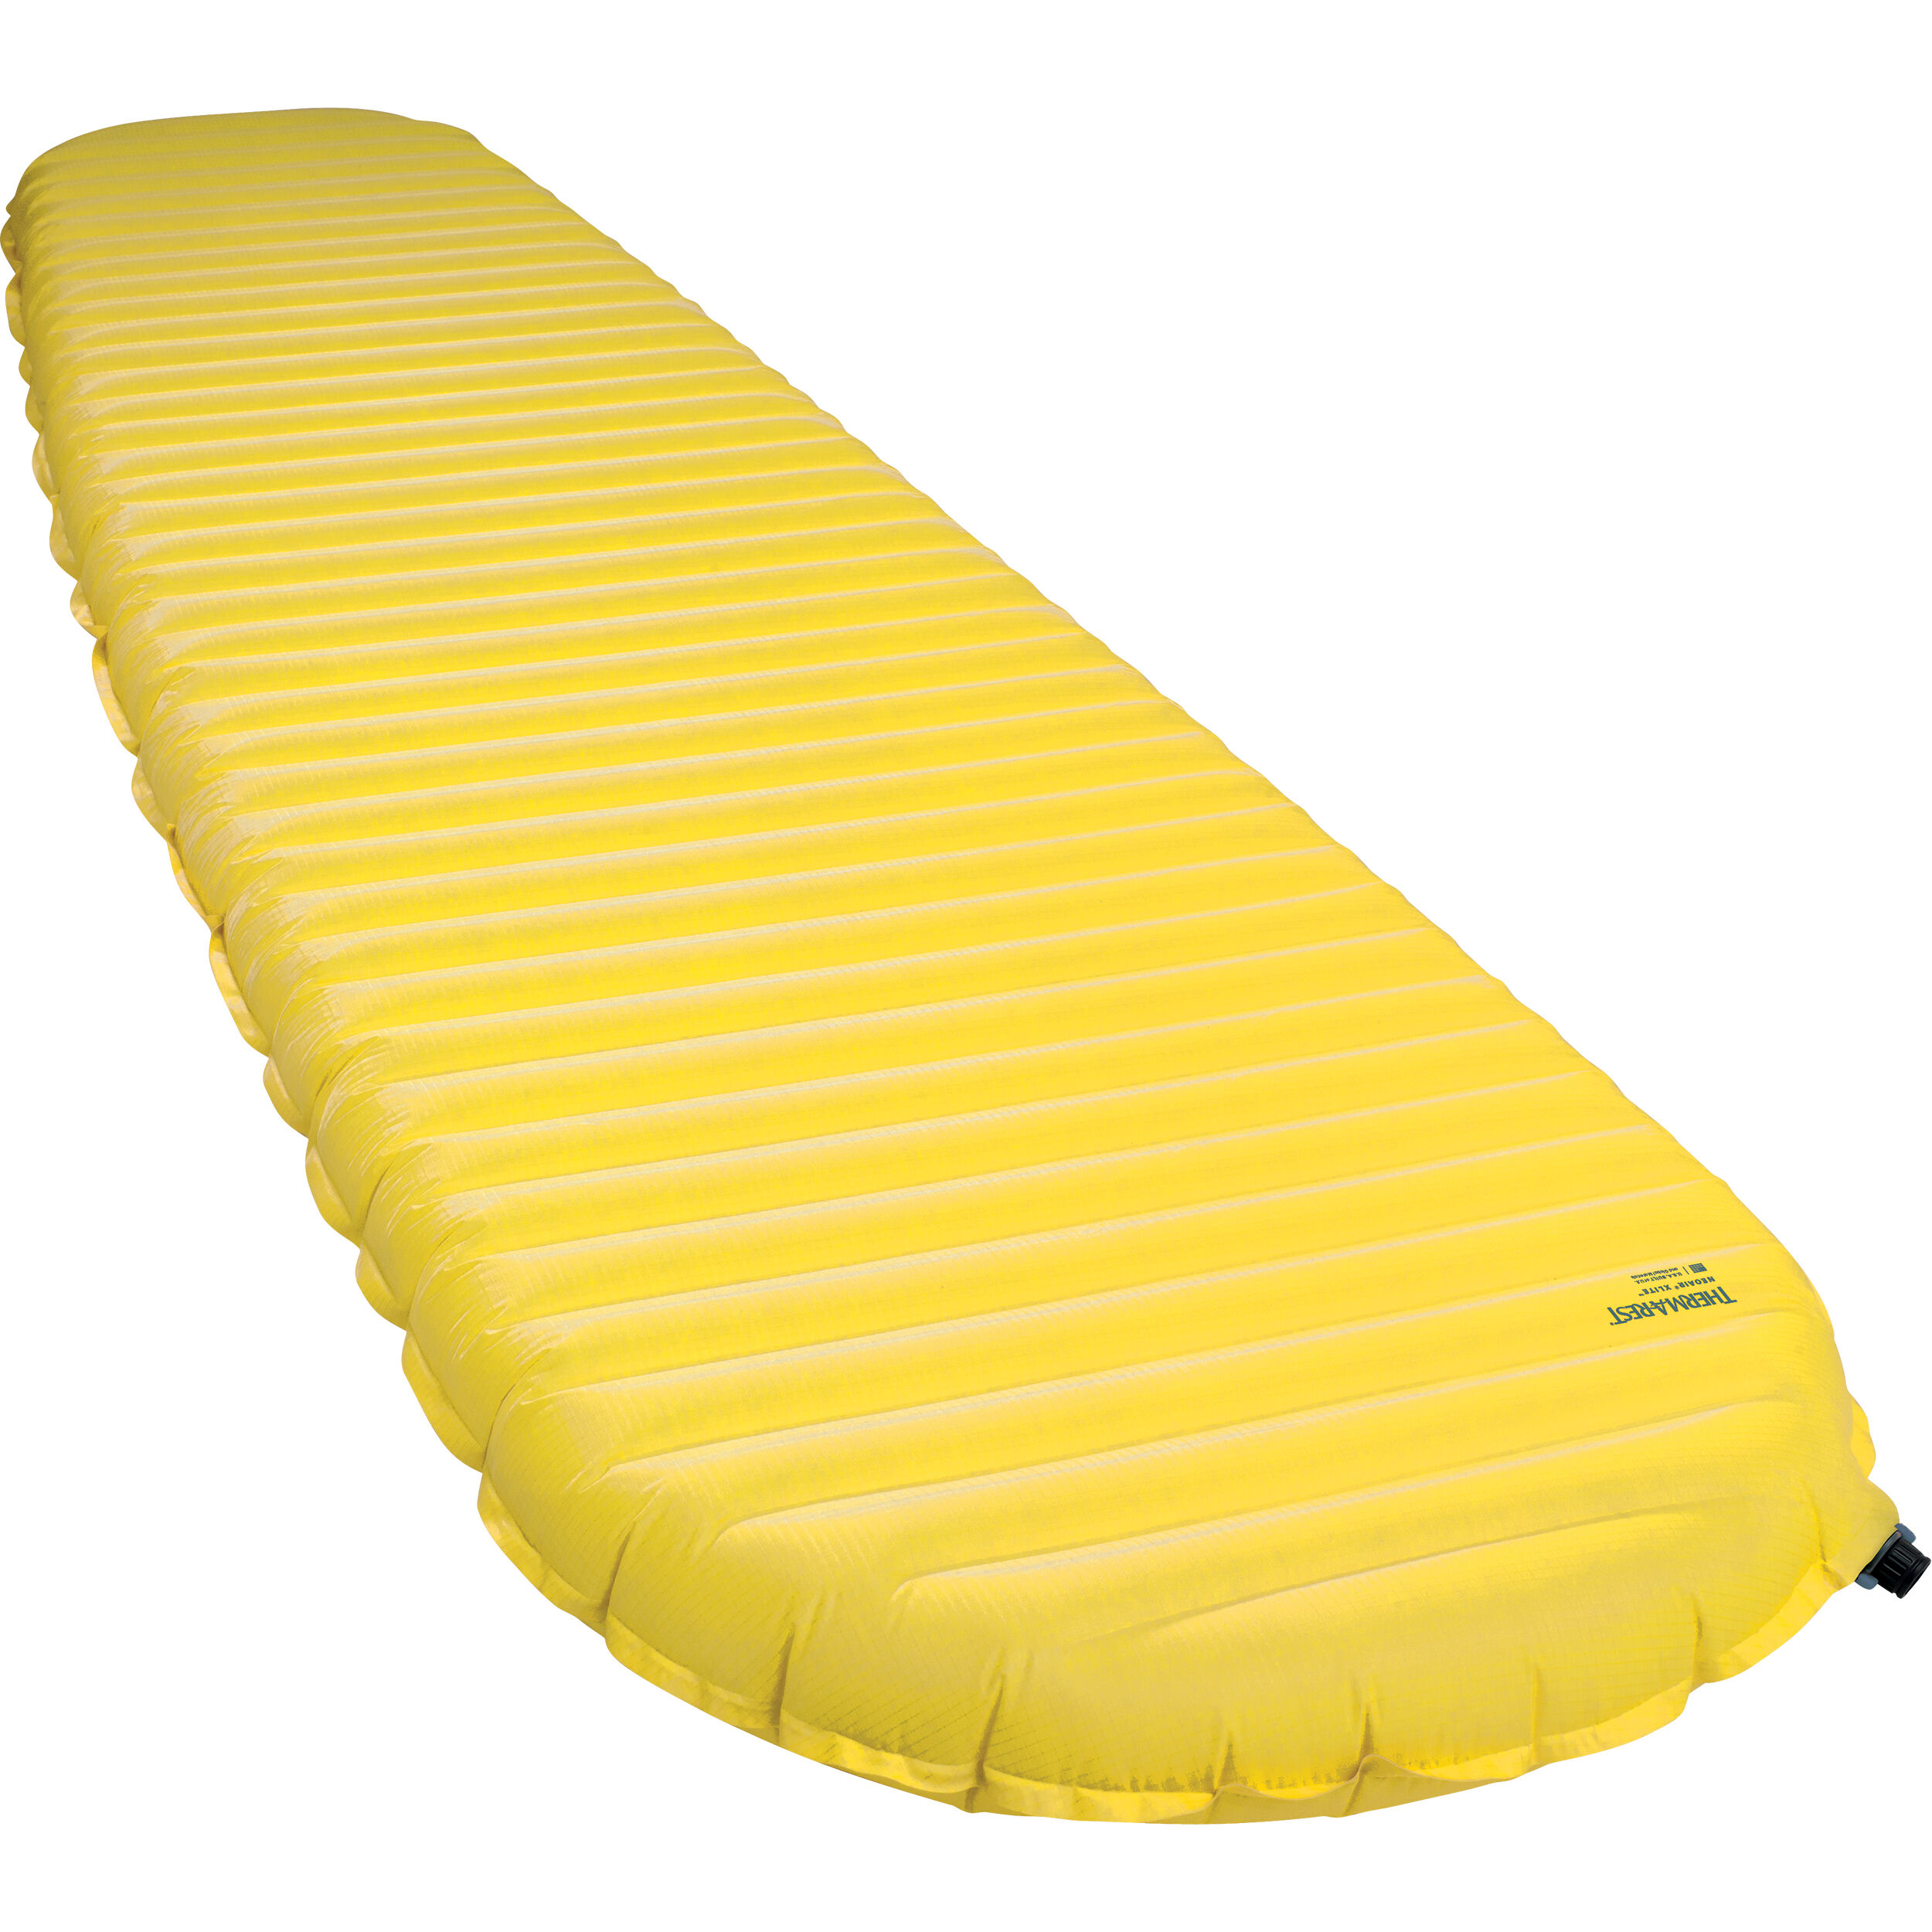 THERMAREST NEOAIR XLITE SLEEPING PAD R4.2 FAST & LIGHT SERIES MADE IN USA 